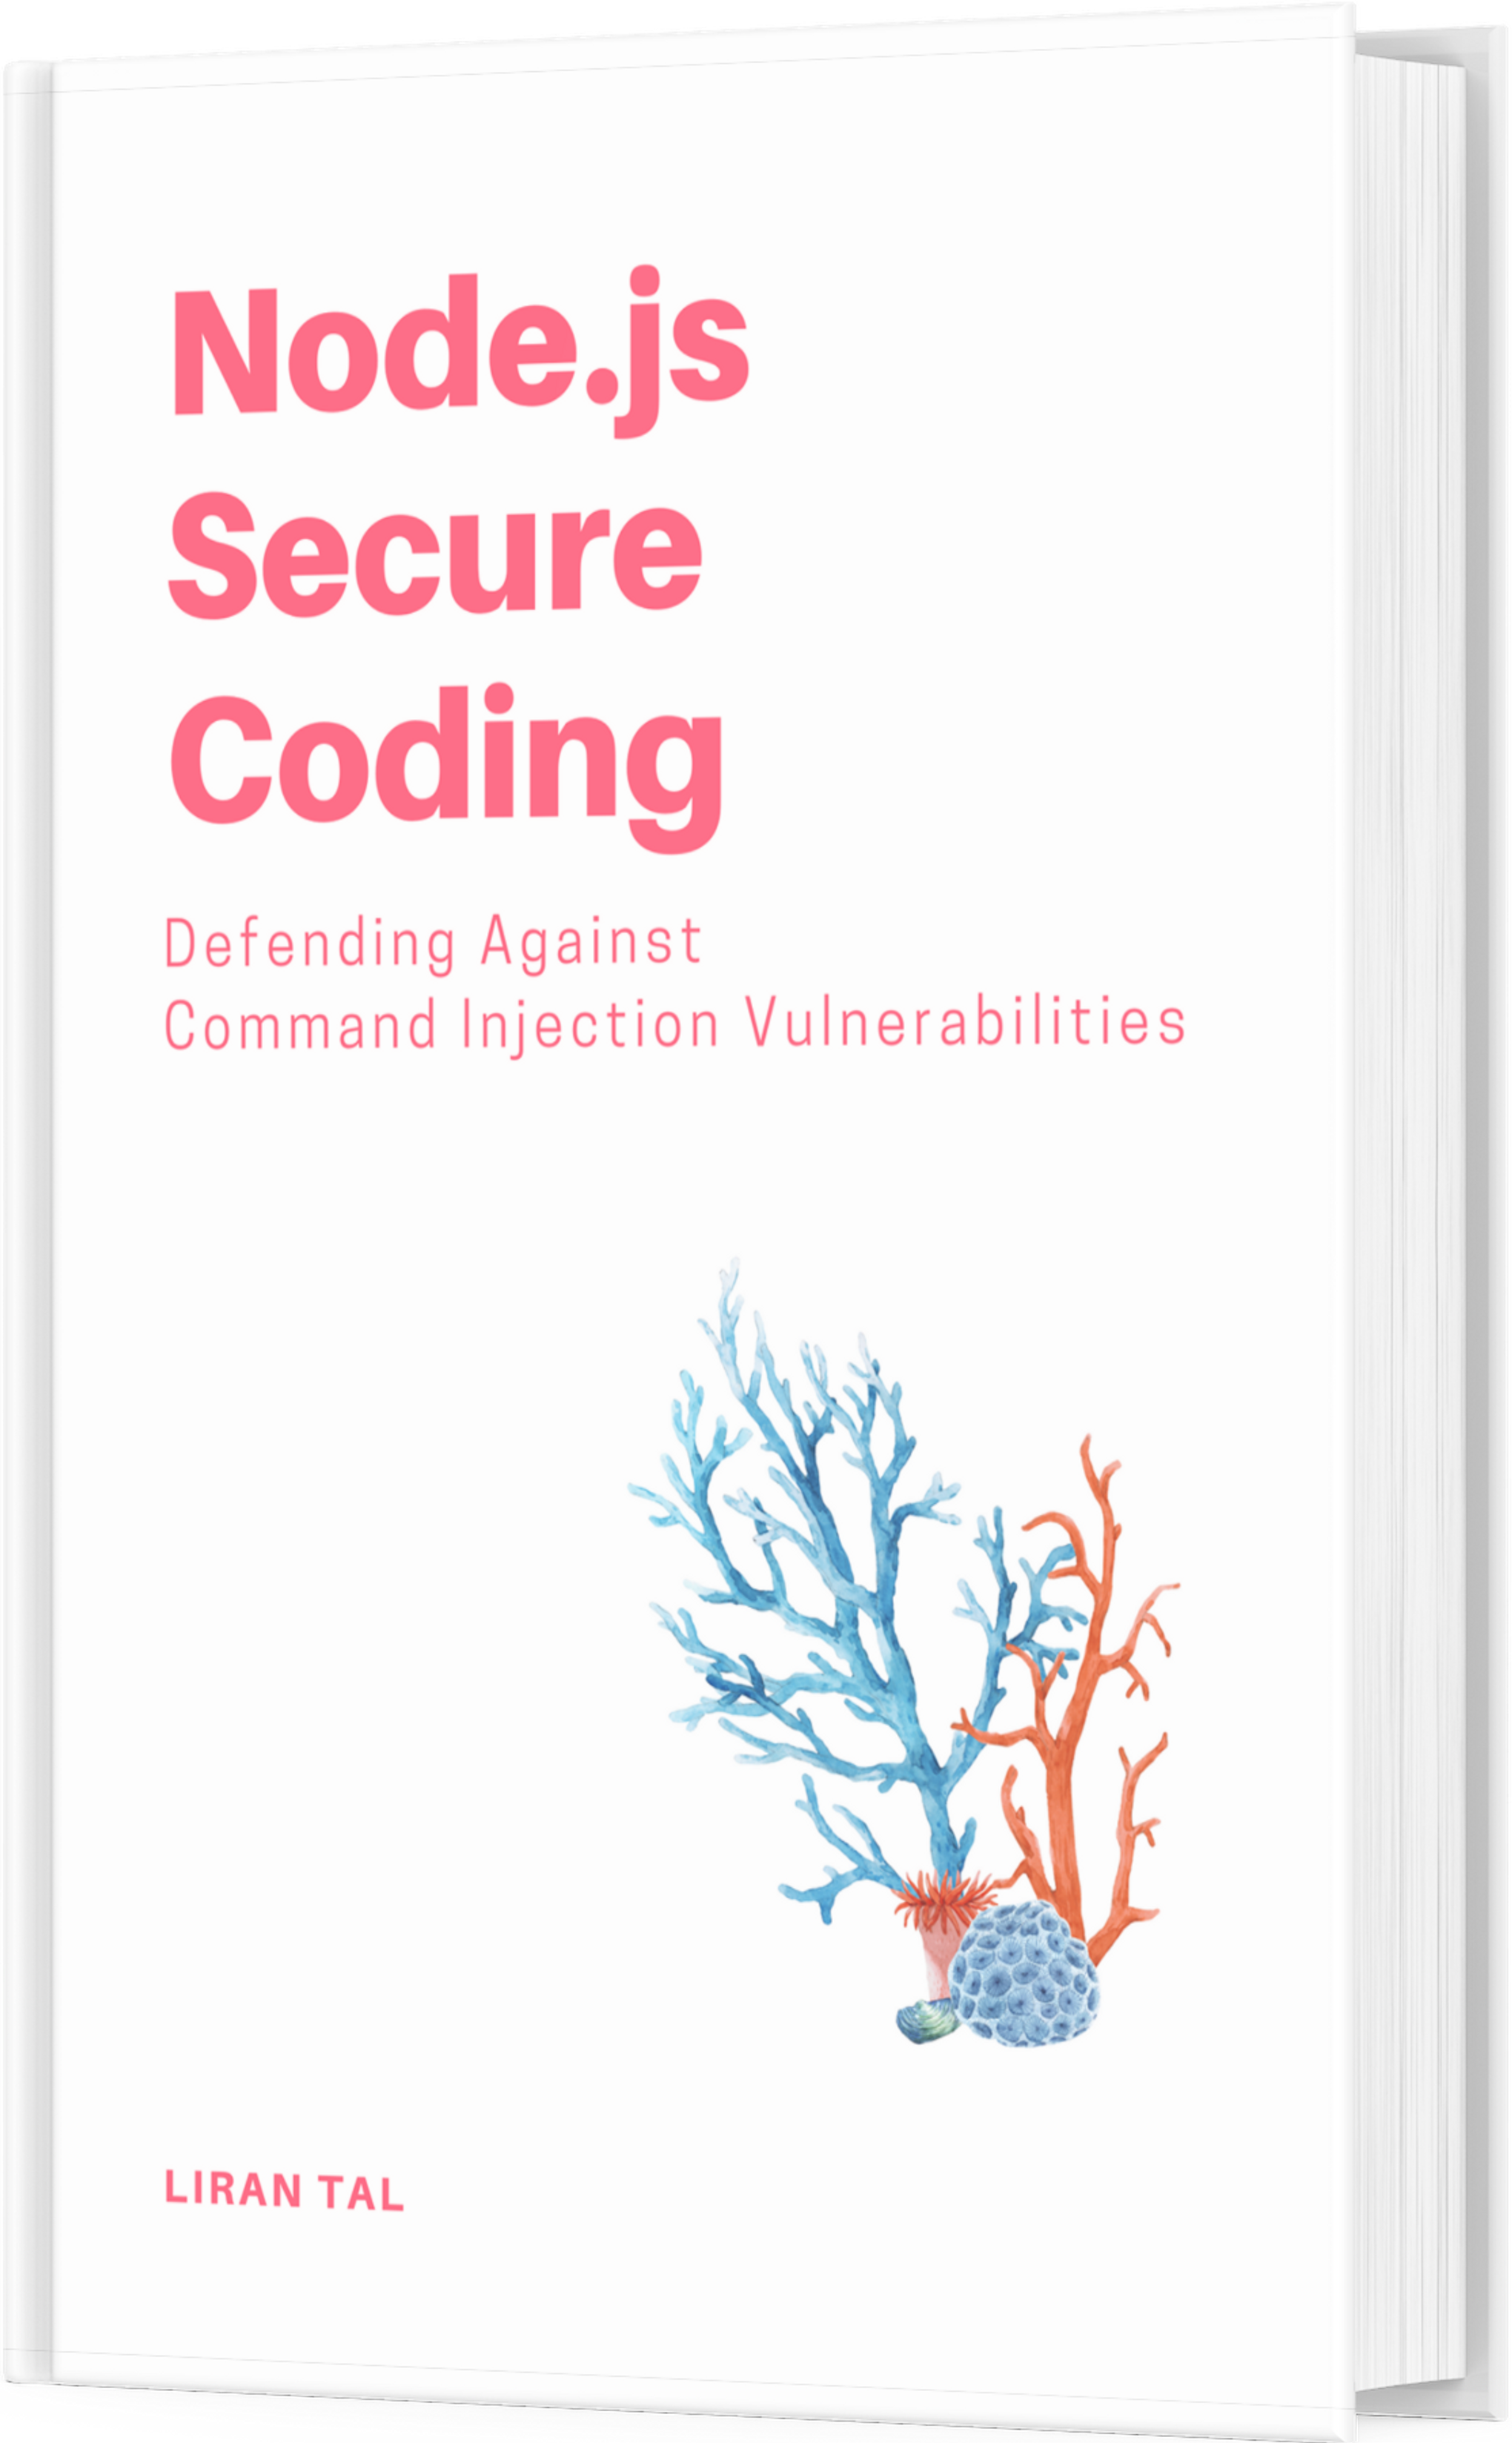 The book: Node.js Secure Coding: Defending Against Command Injection Vulnerabilities